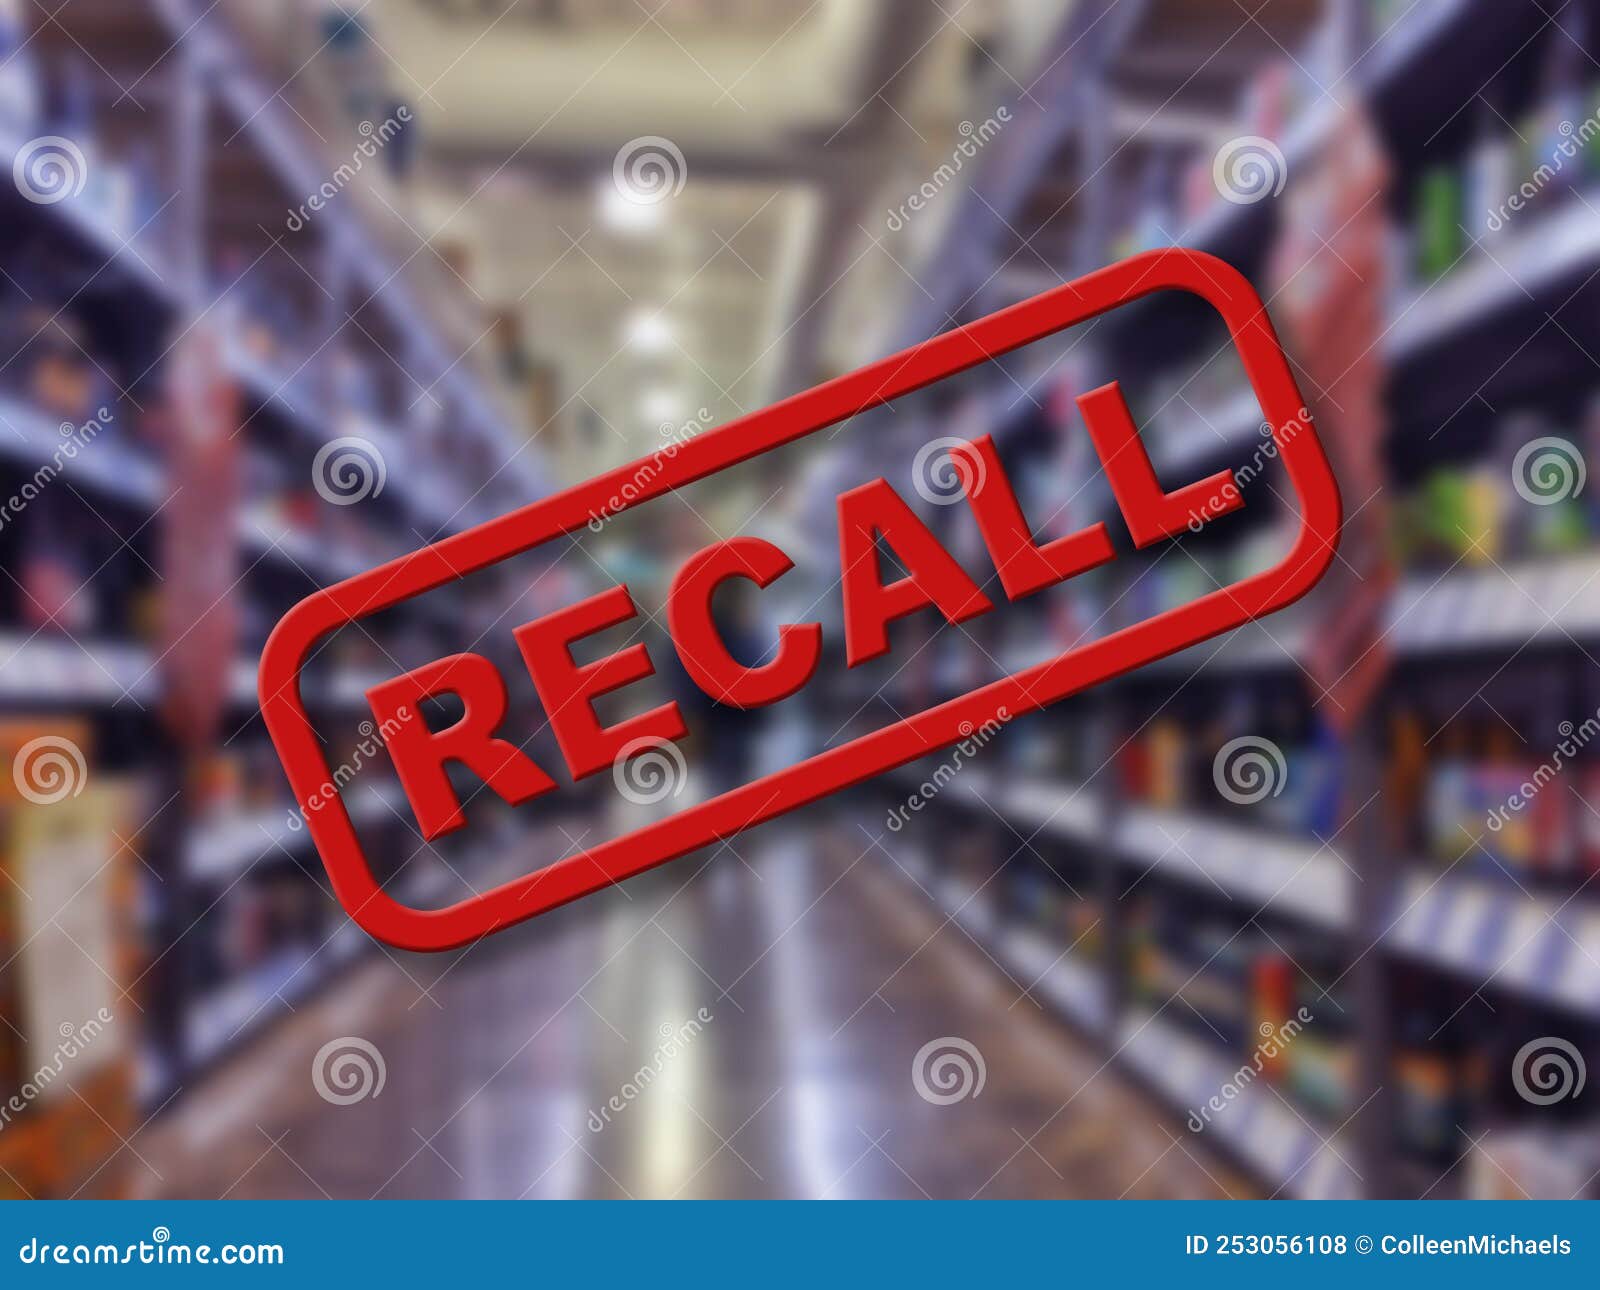 blurry interior of a liquor store aisle behind large red recall text